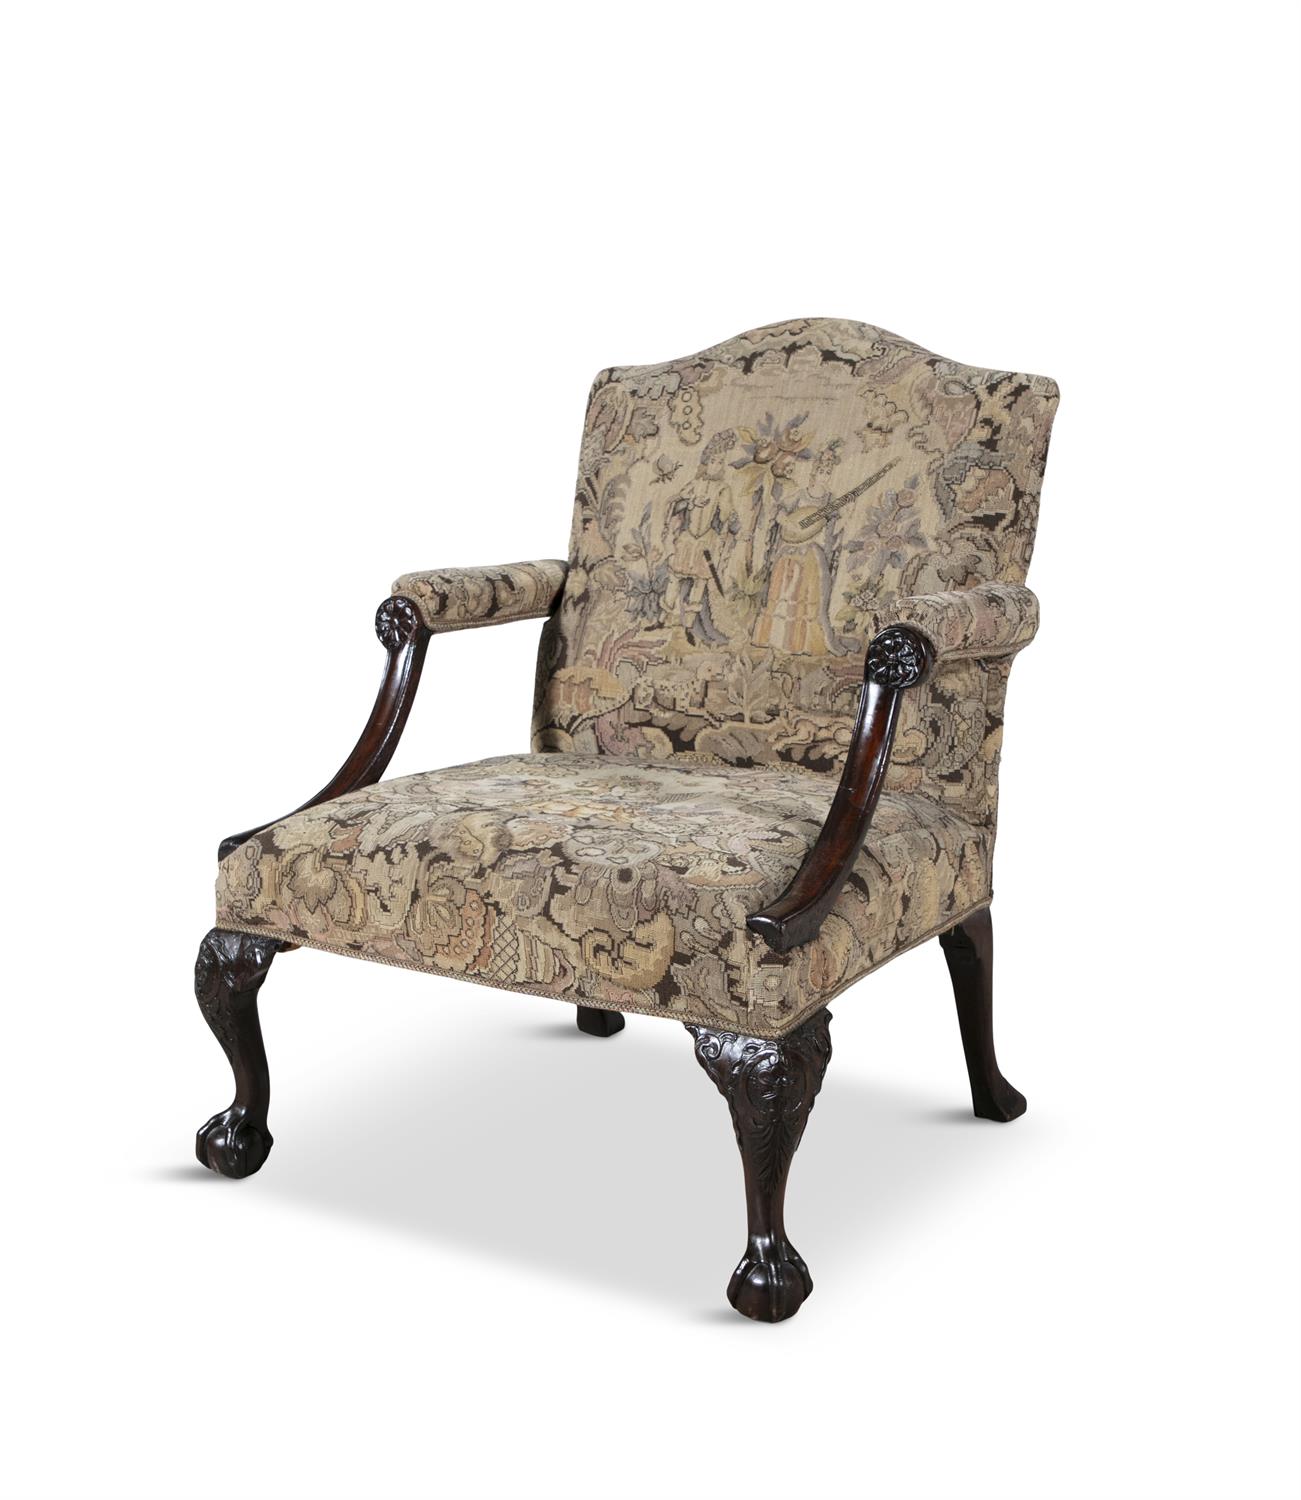 A GEORGE III MAHOGANY FRAMED GAINSBOROUGH ARMCHAIR the arched padded back and seat covered in a - Image 2 of 6